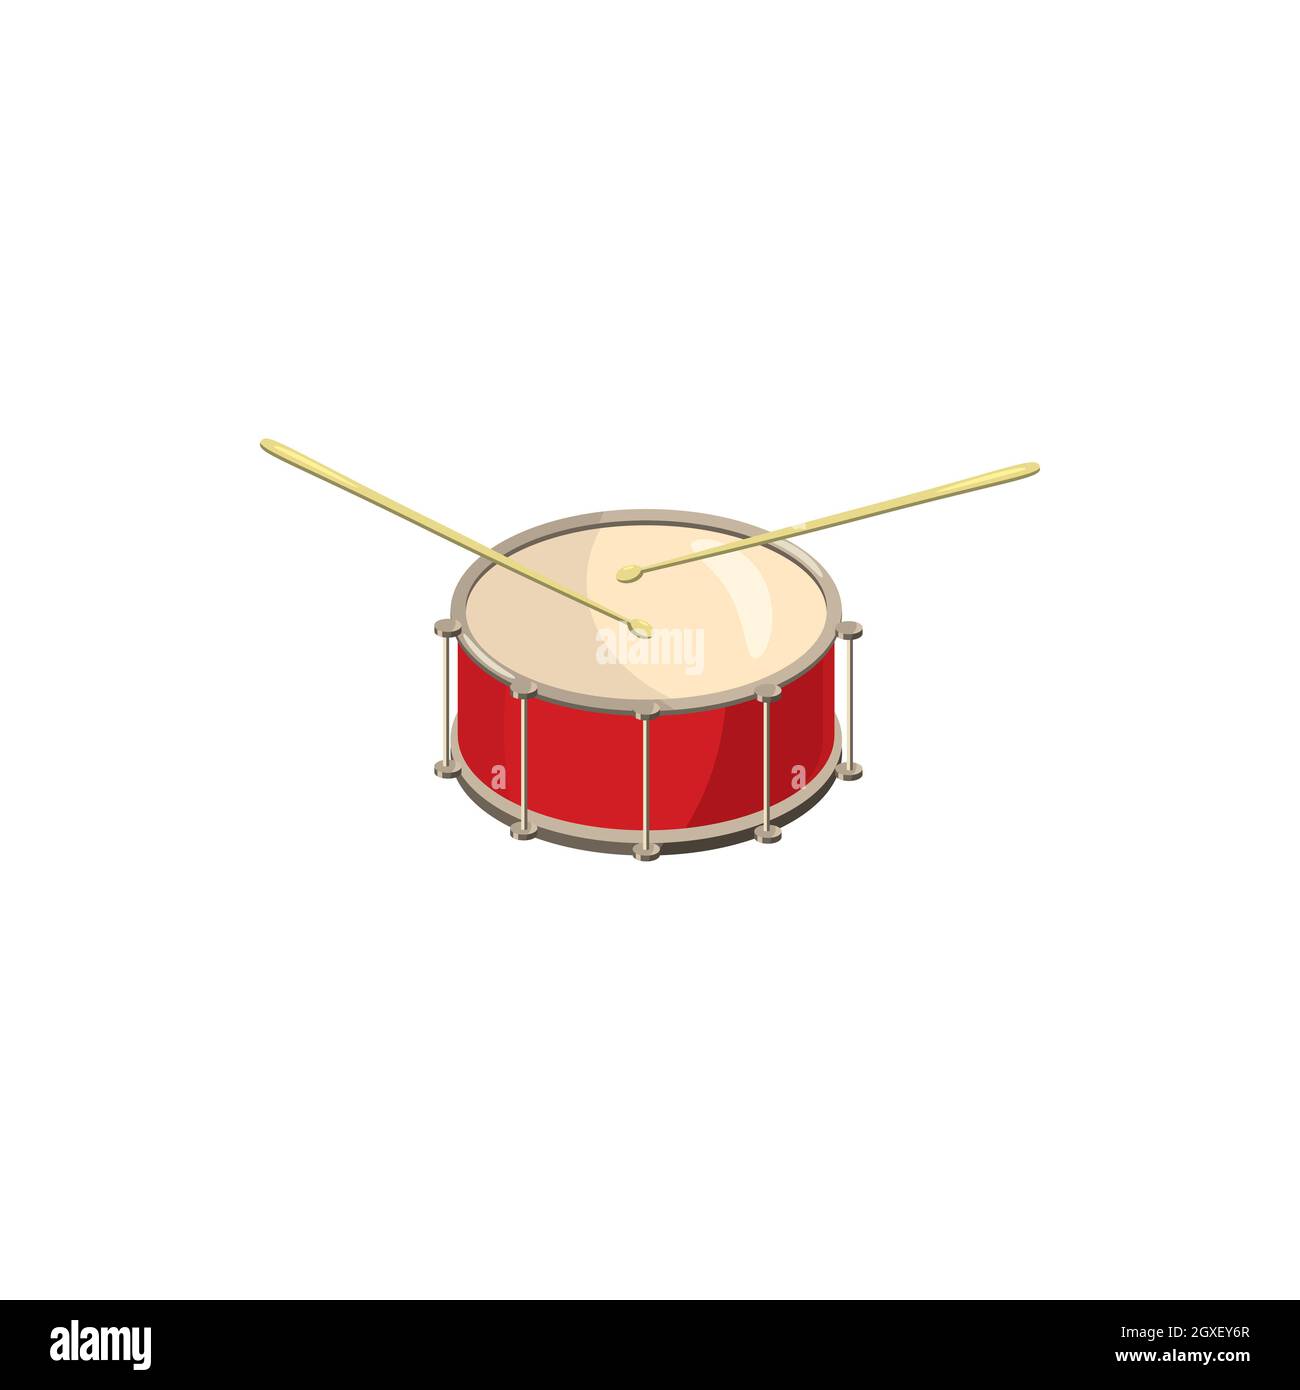 Realistic Red Drum Wooden Drum Sticks Stock Vector (Royalty Free)  1936481851